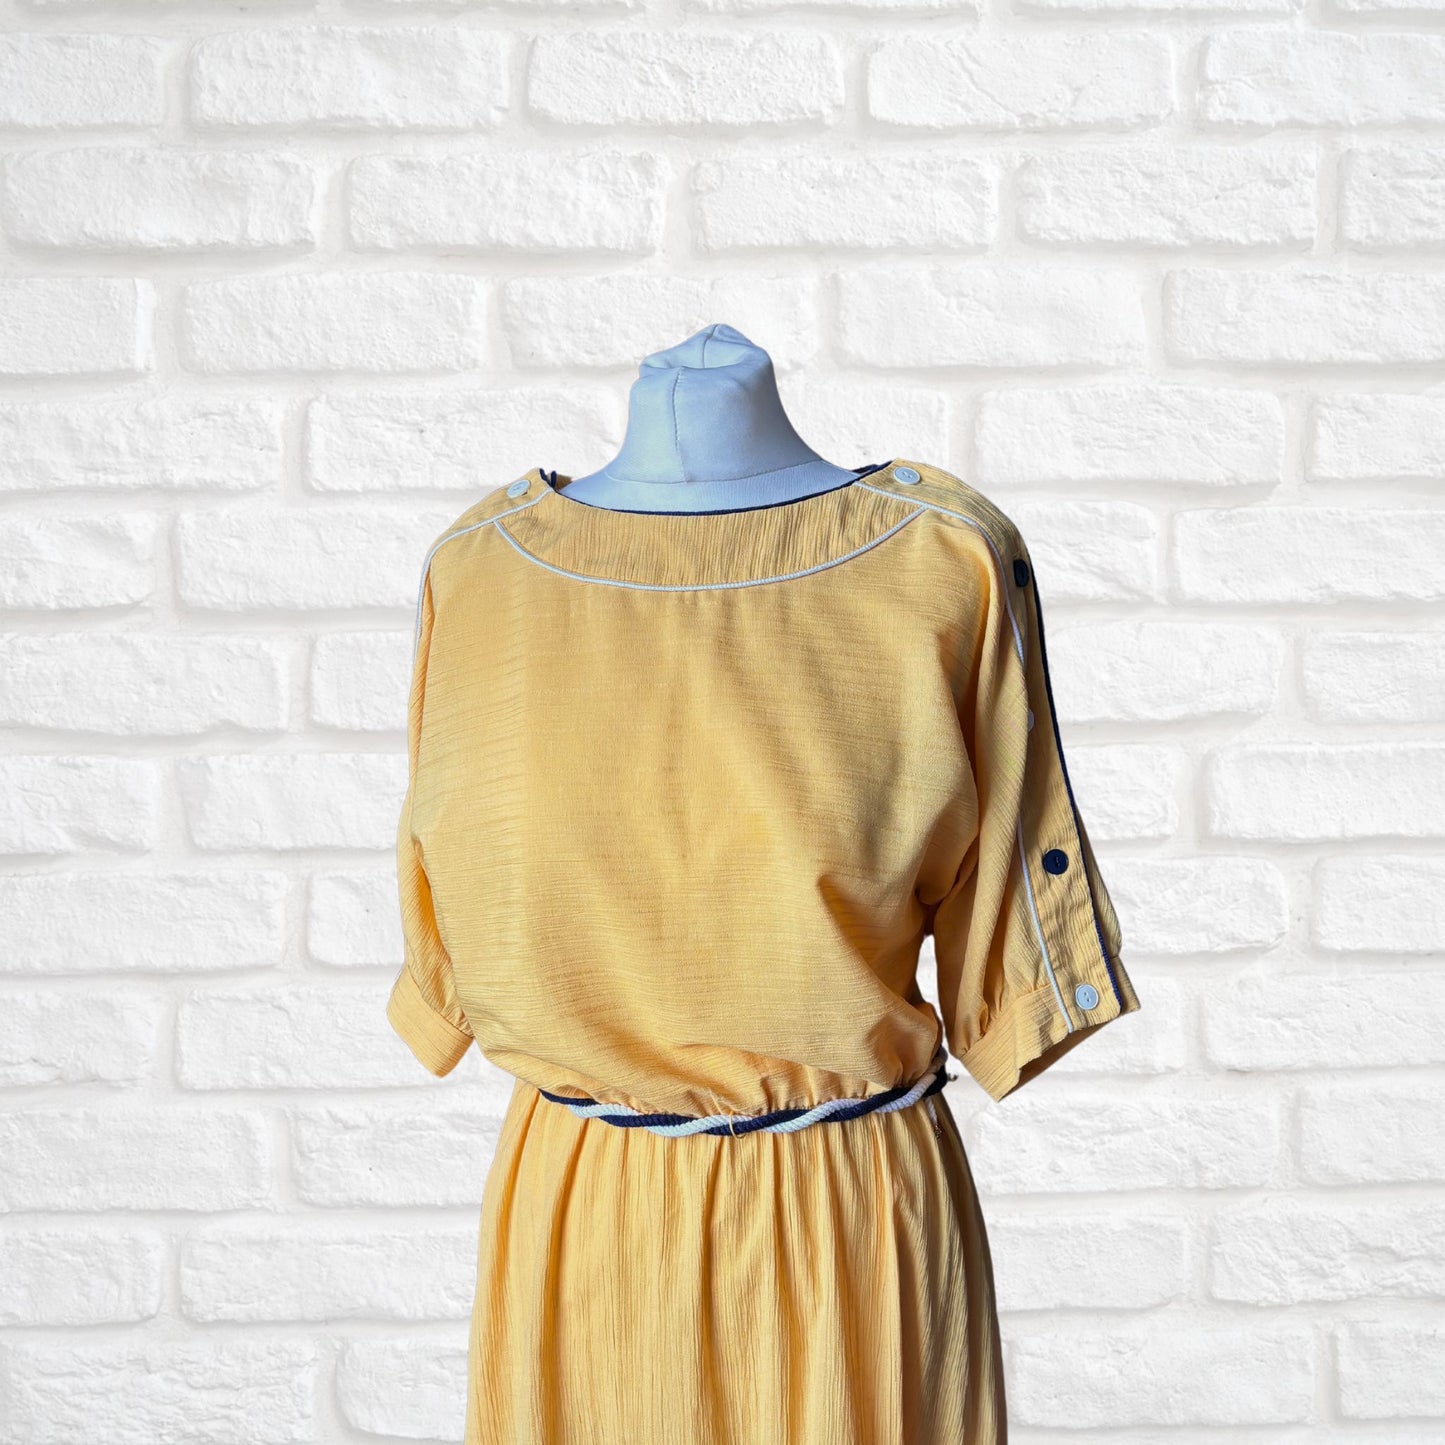 Vintage Yellow 80s Midi Dress with Navy Blue and White Buttons, Trim and Rope Belt.  Approx UK Size 10-12